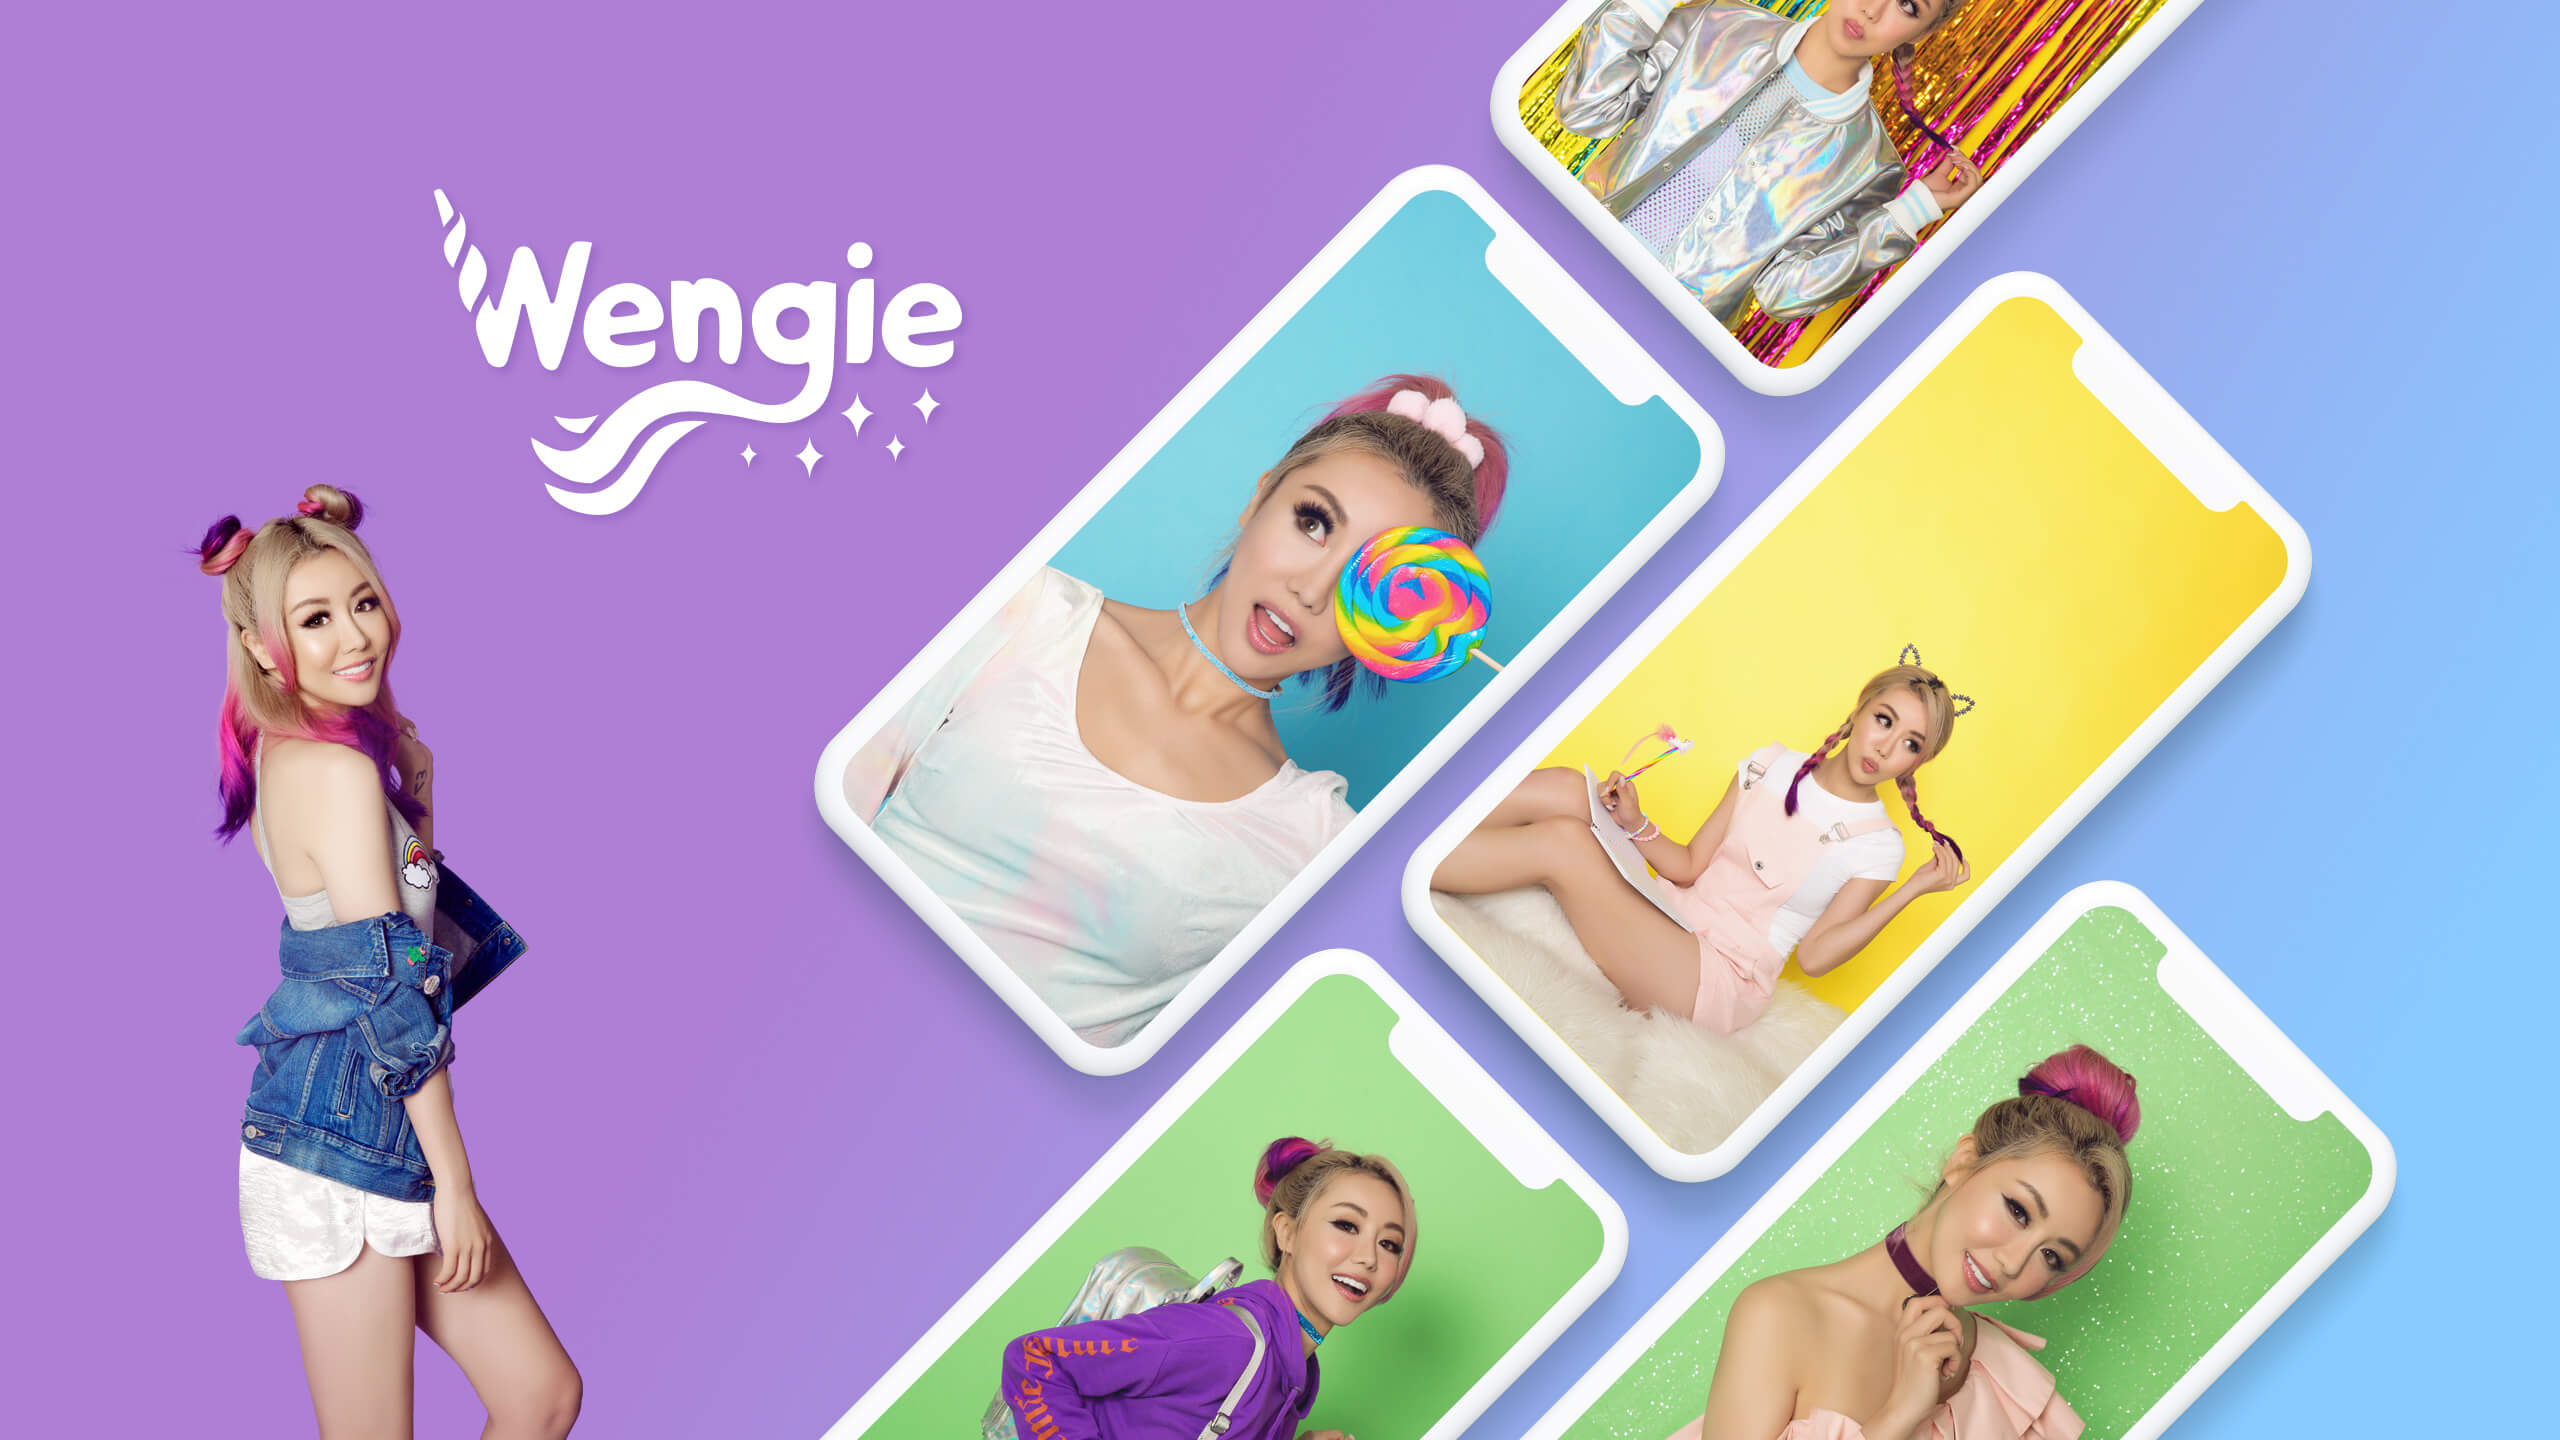 Victorious-Wengie-Semplice-2560-1440